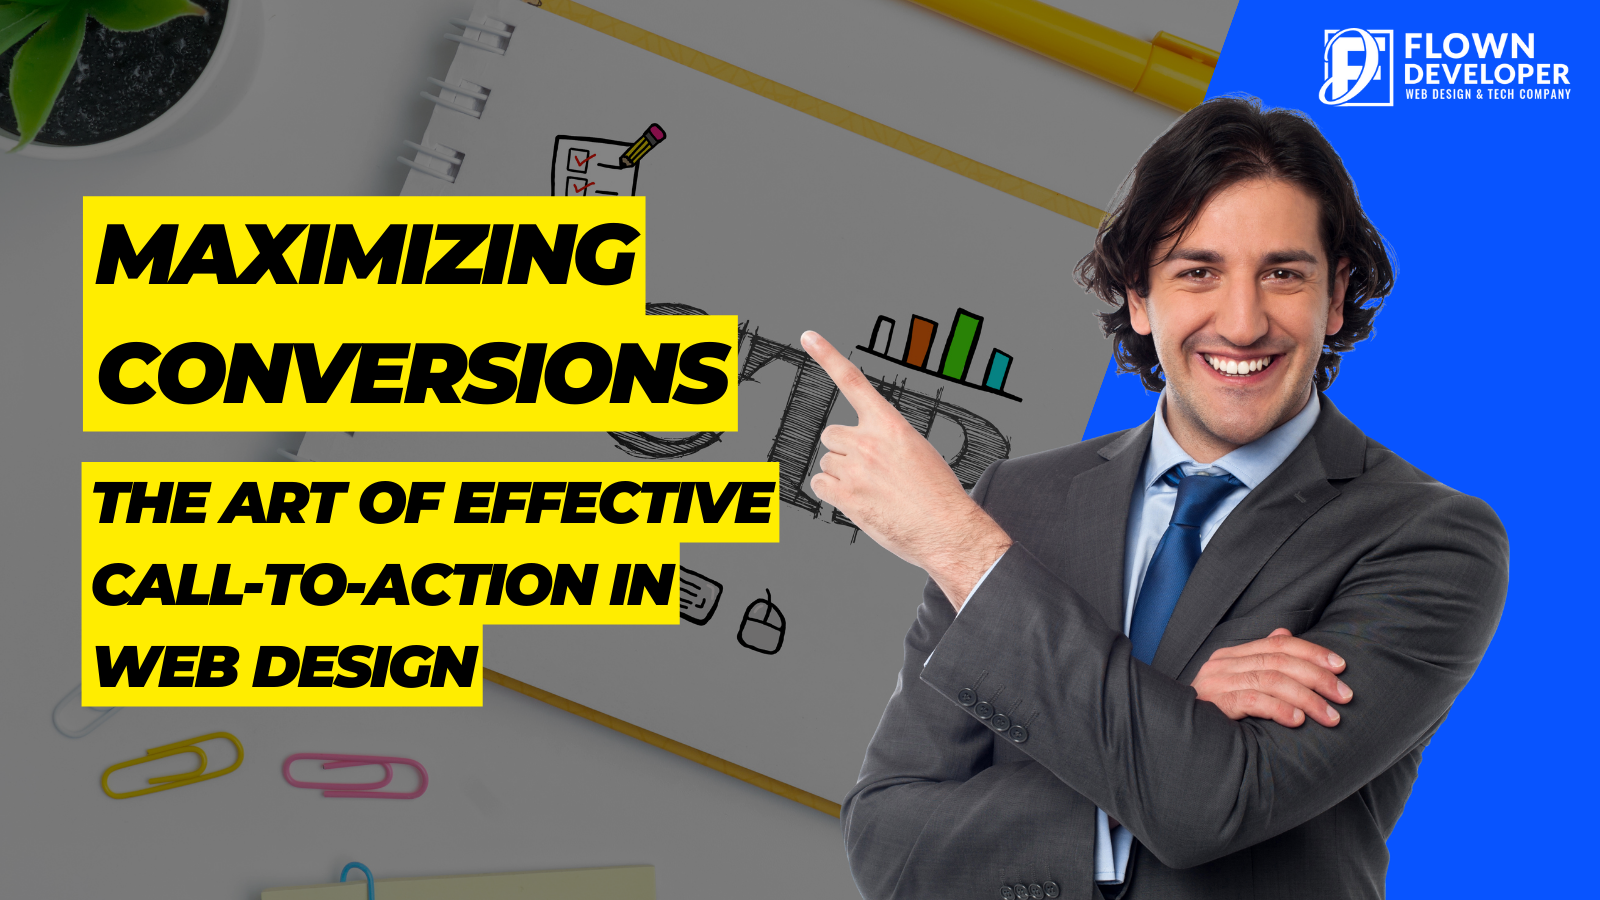 The Art of Effective Call-to-Action in Web Design